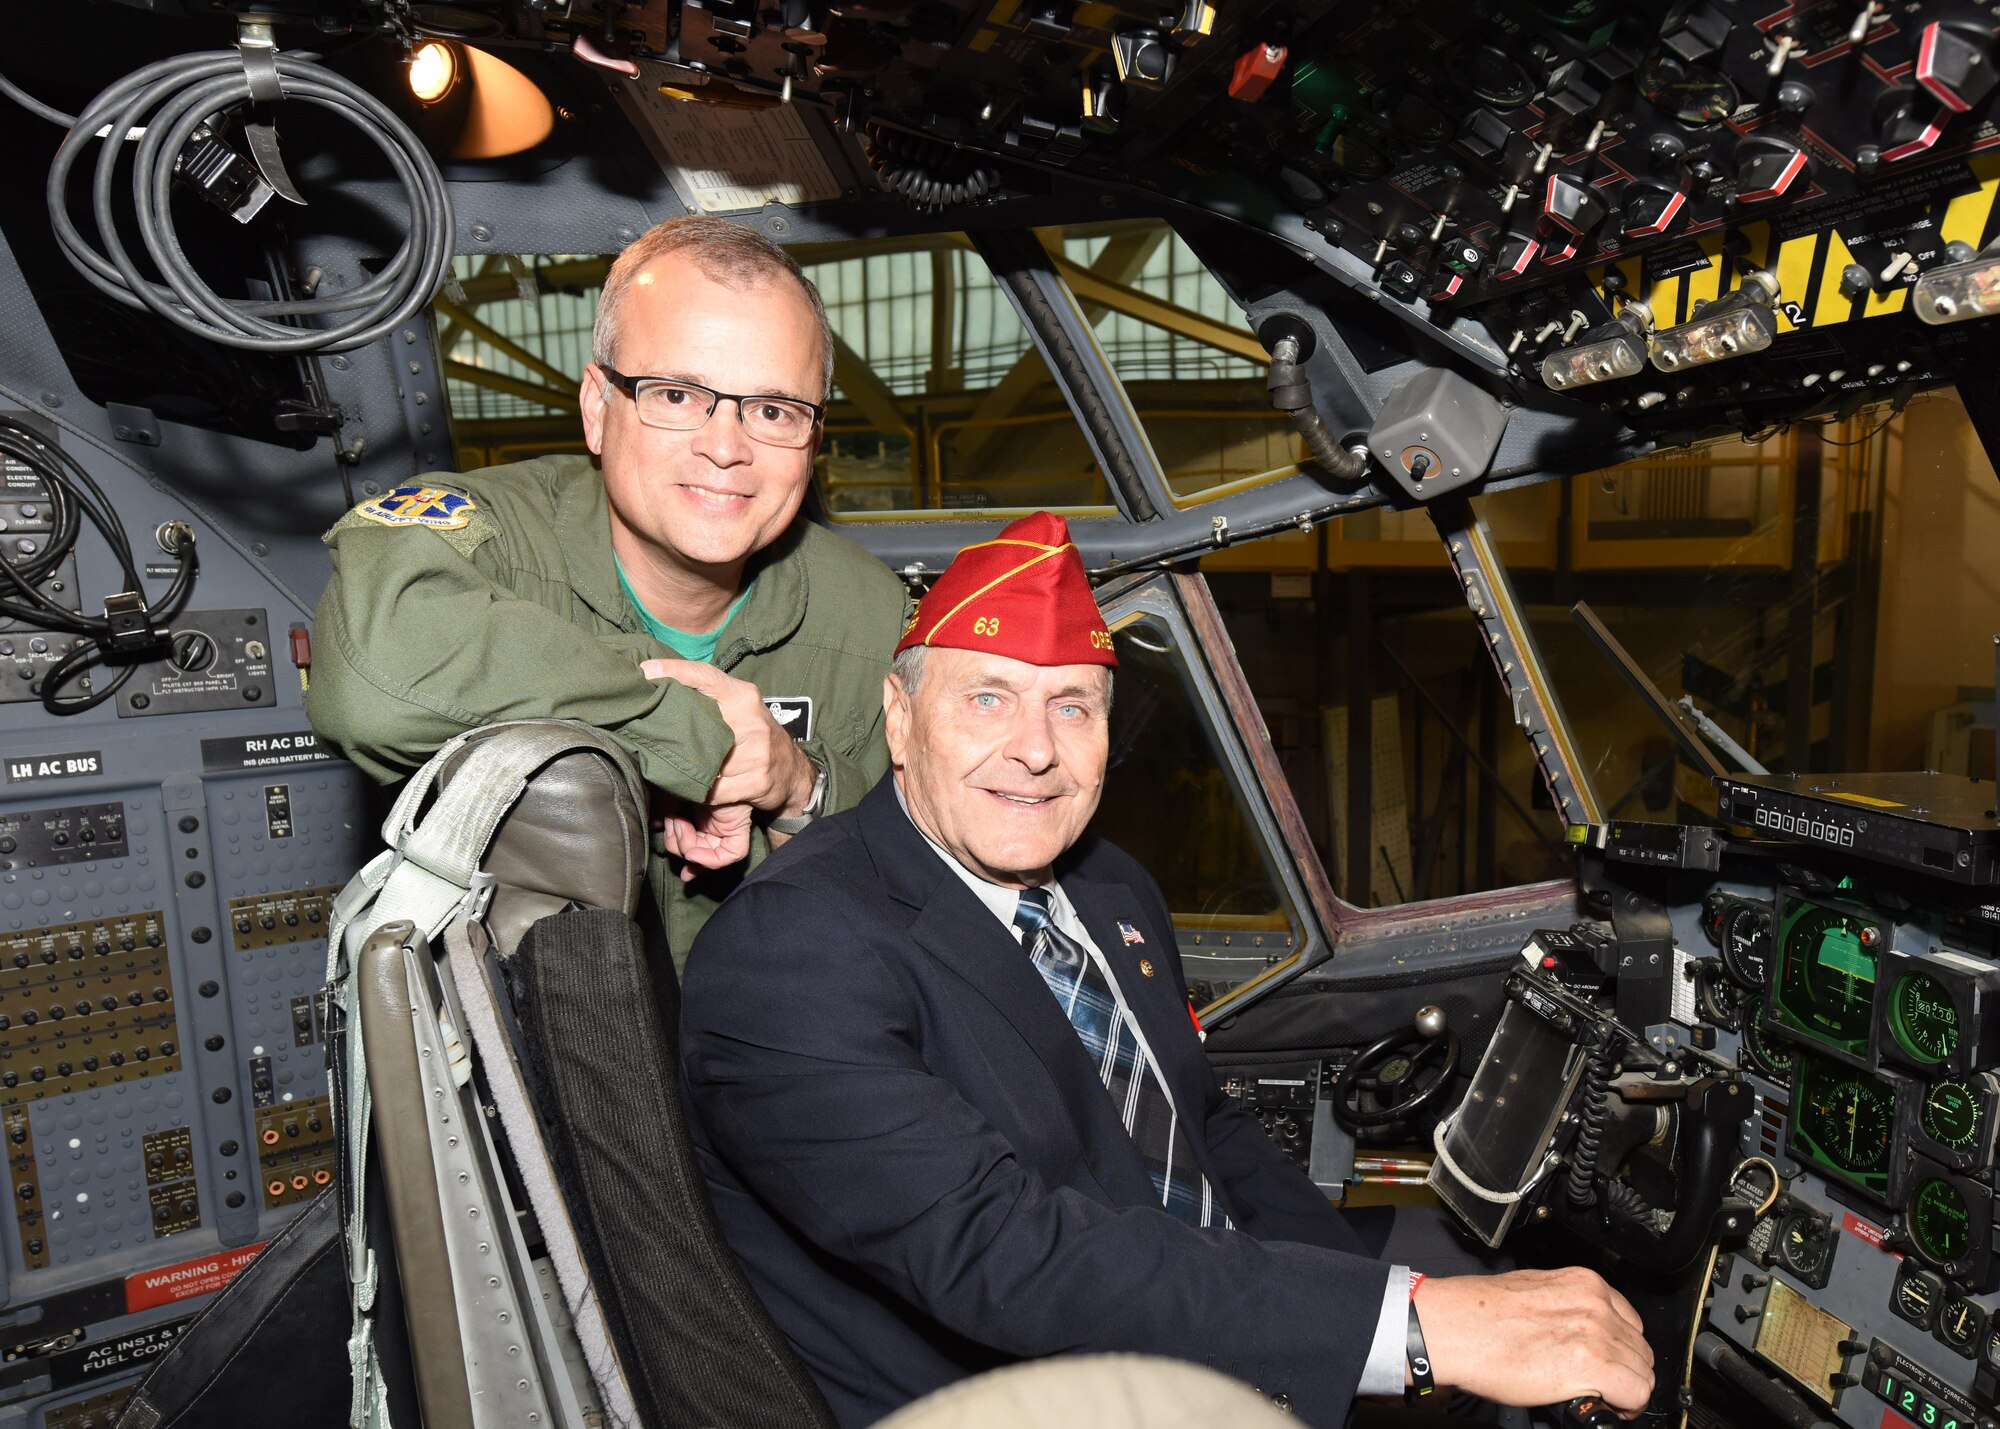 American Legion National Commander Charles E. Schmidt sits in the pilot’s seat of a C-130 aircraft during a static tour conducted by 914th Airlift Wing commander Col. Brian Bowman at the Niagara Falls Air Reserve Station, N.Y. October 14, 2016.  (U.S. Air Force photo by Peter Borys)